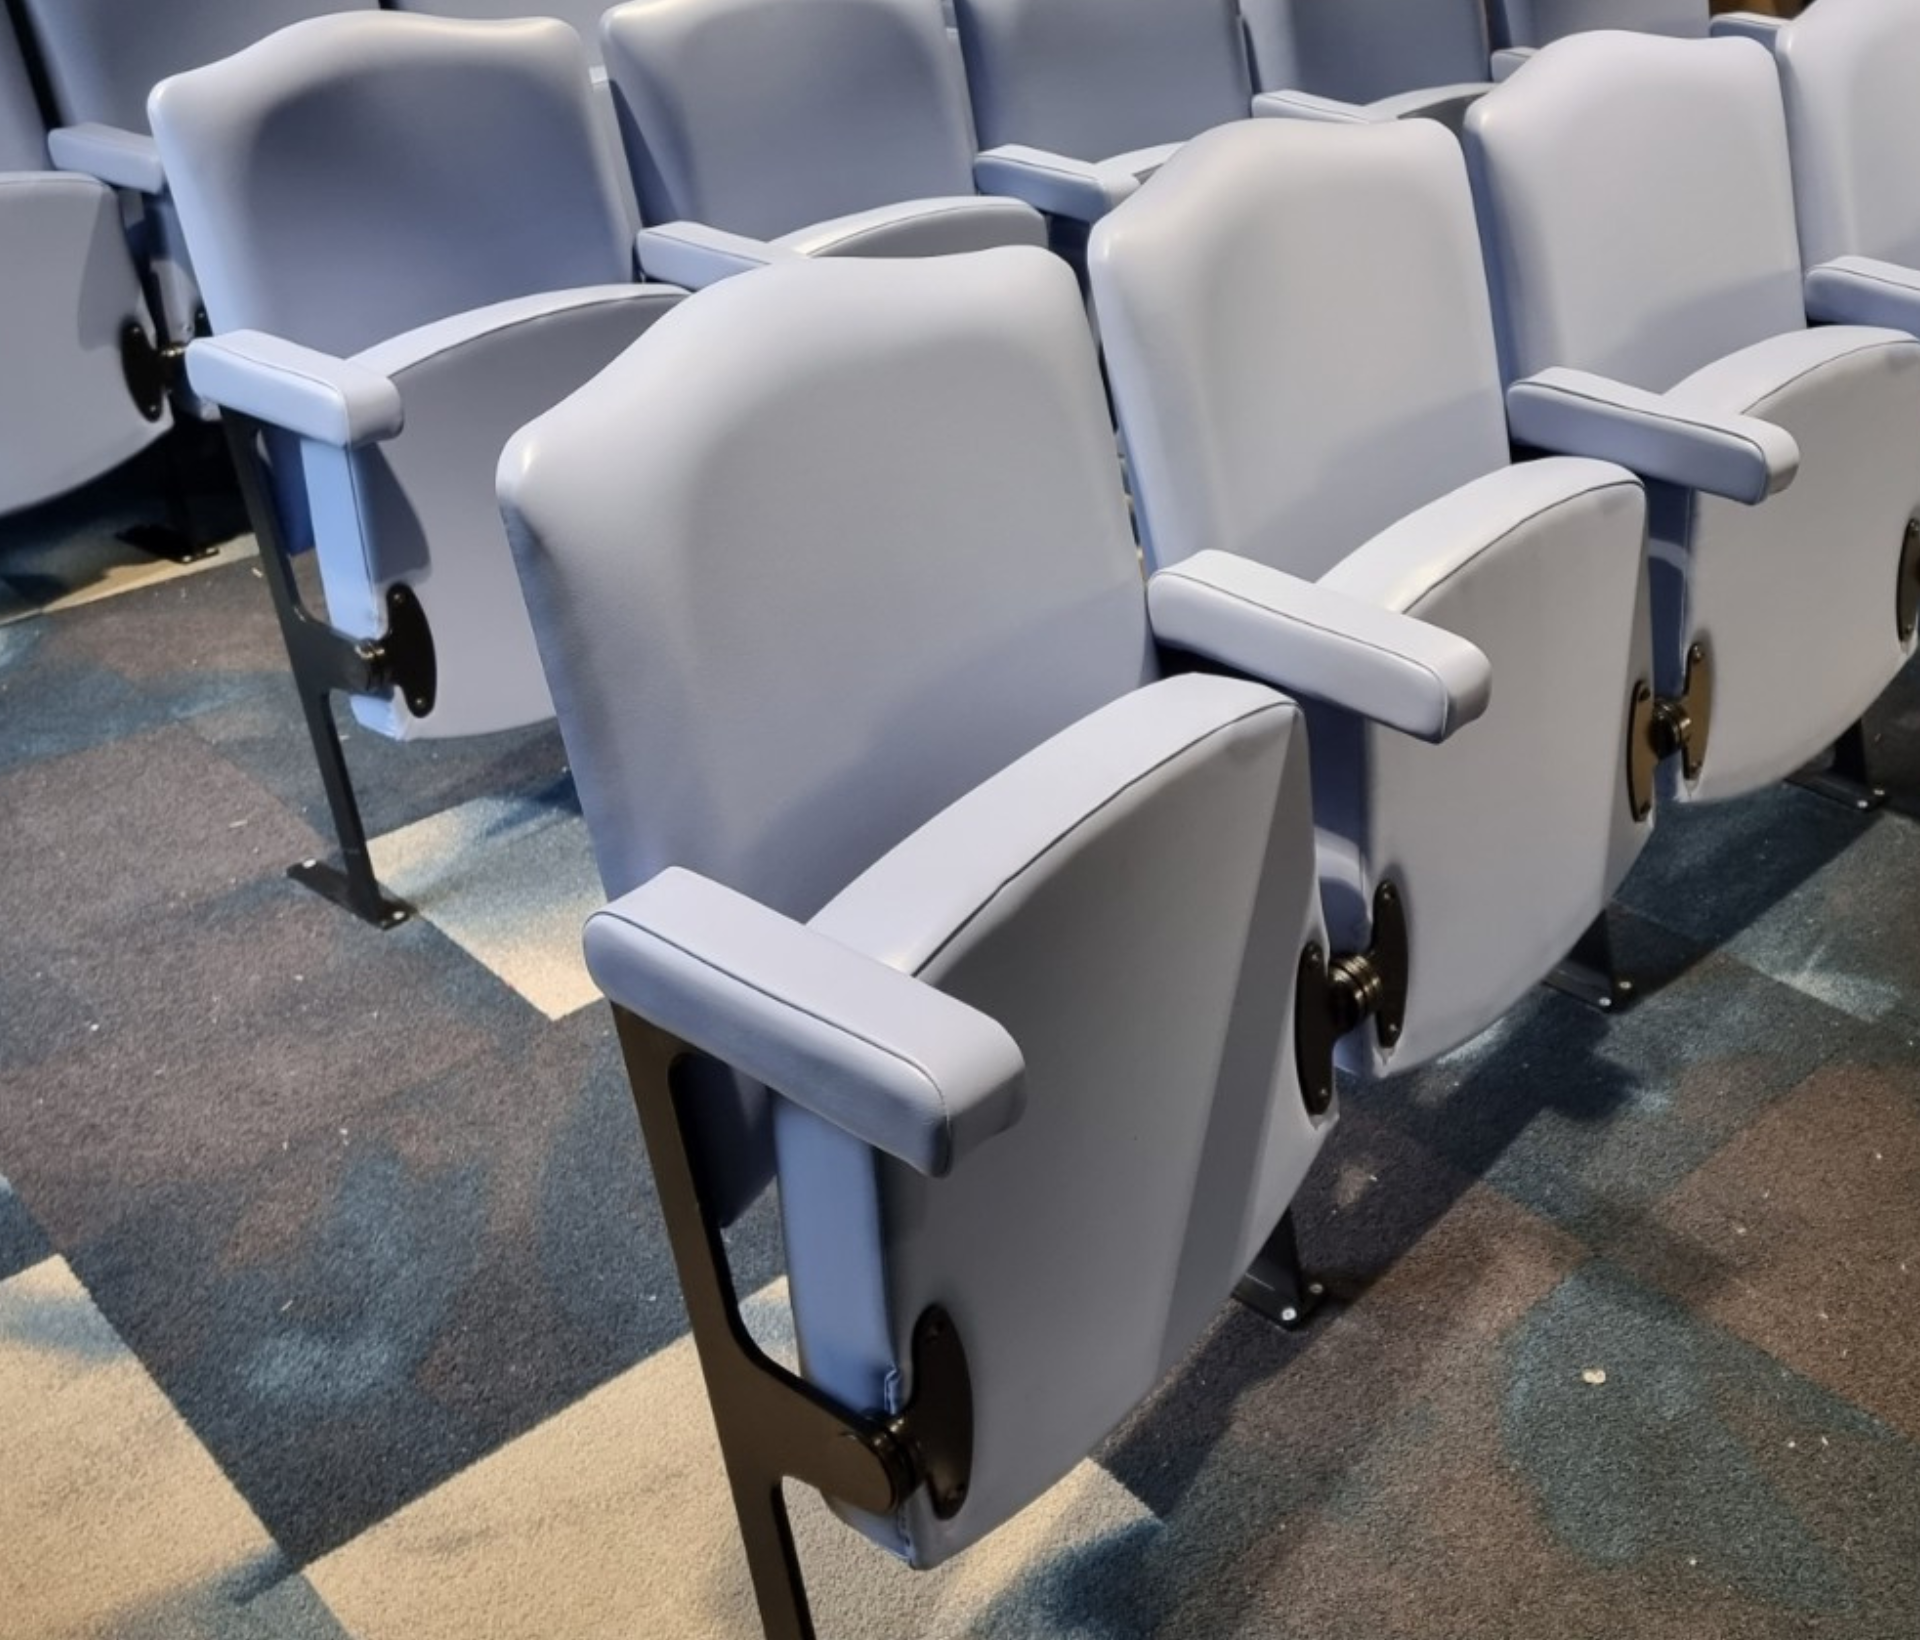 Rows of blue tip up seating in a room.